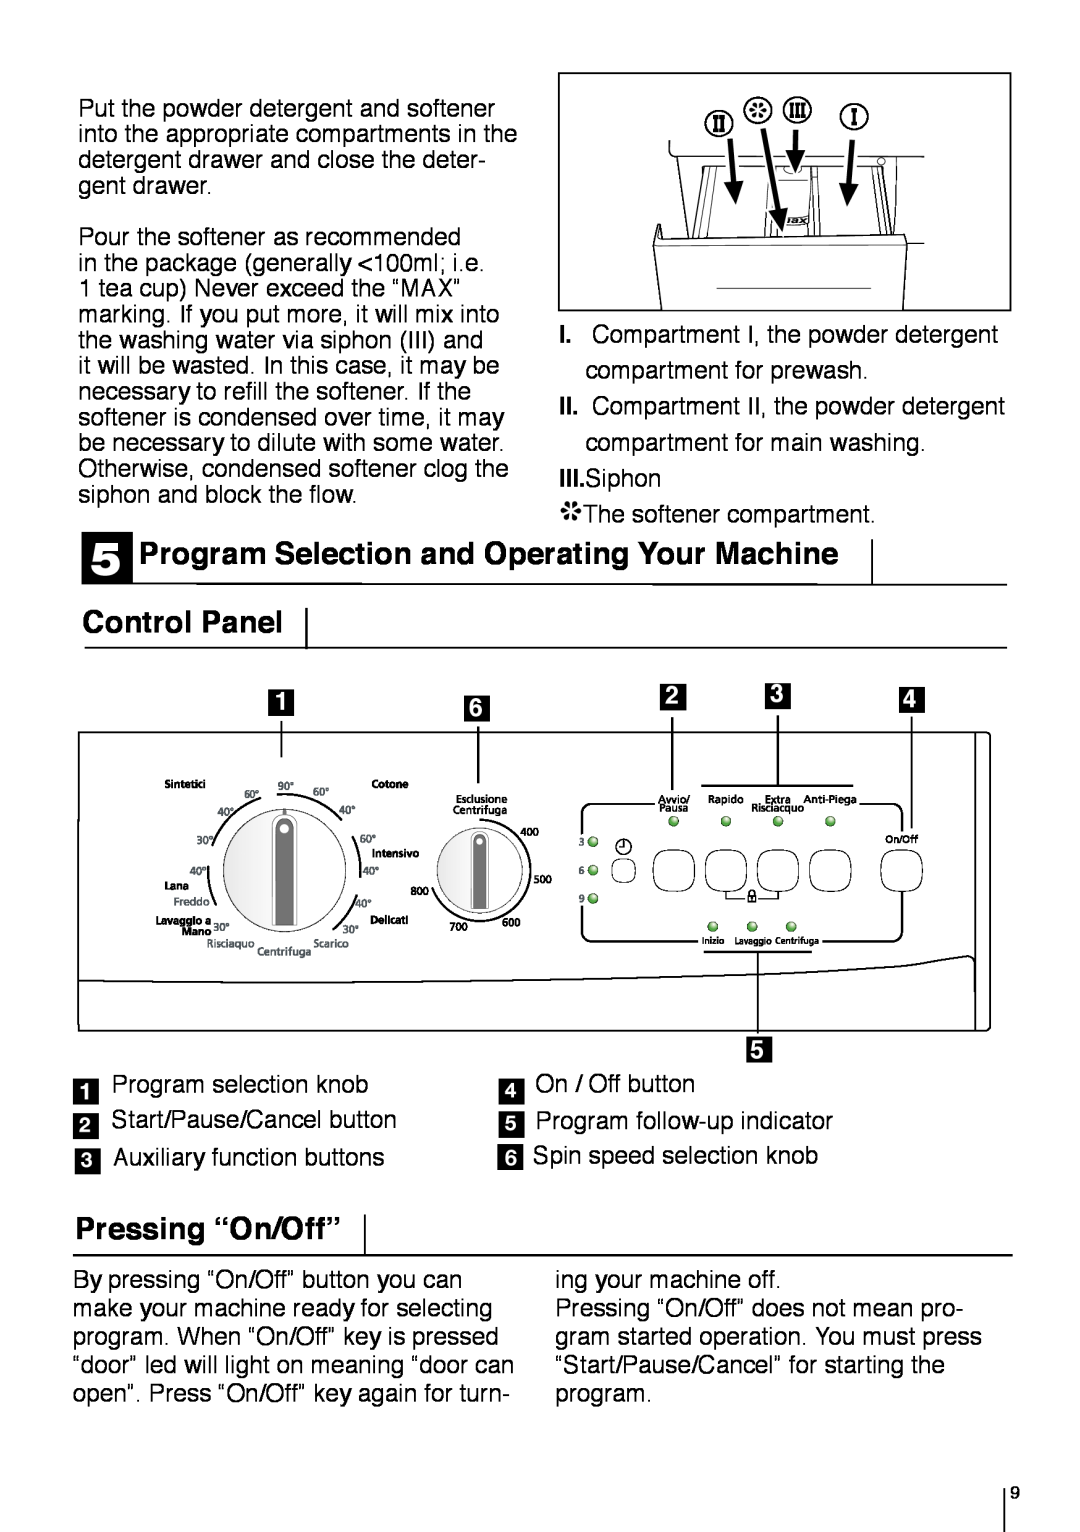 Smeg LBS 845 manual Program Selection and Operating Your Machine Control Panel, Pressing “On/Off” 